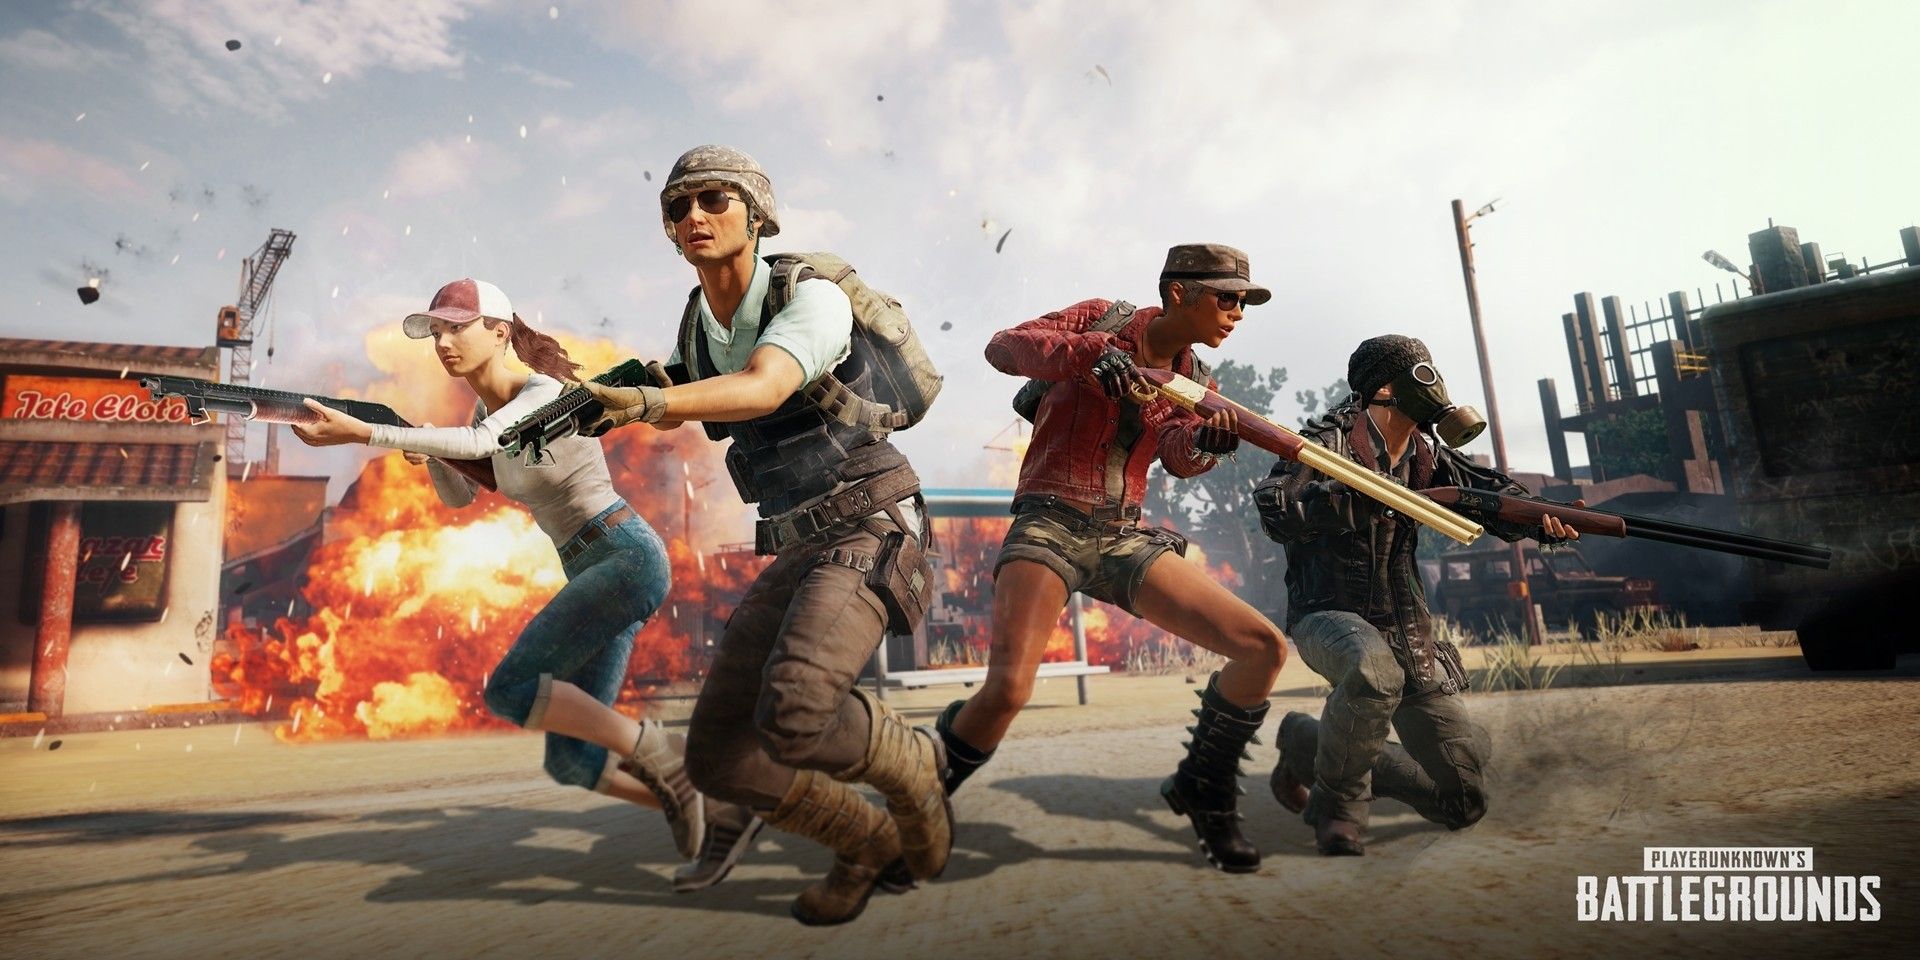 Pubg S Deathmatch Mode Is What The Game Needs To Survive In